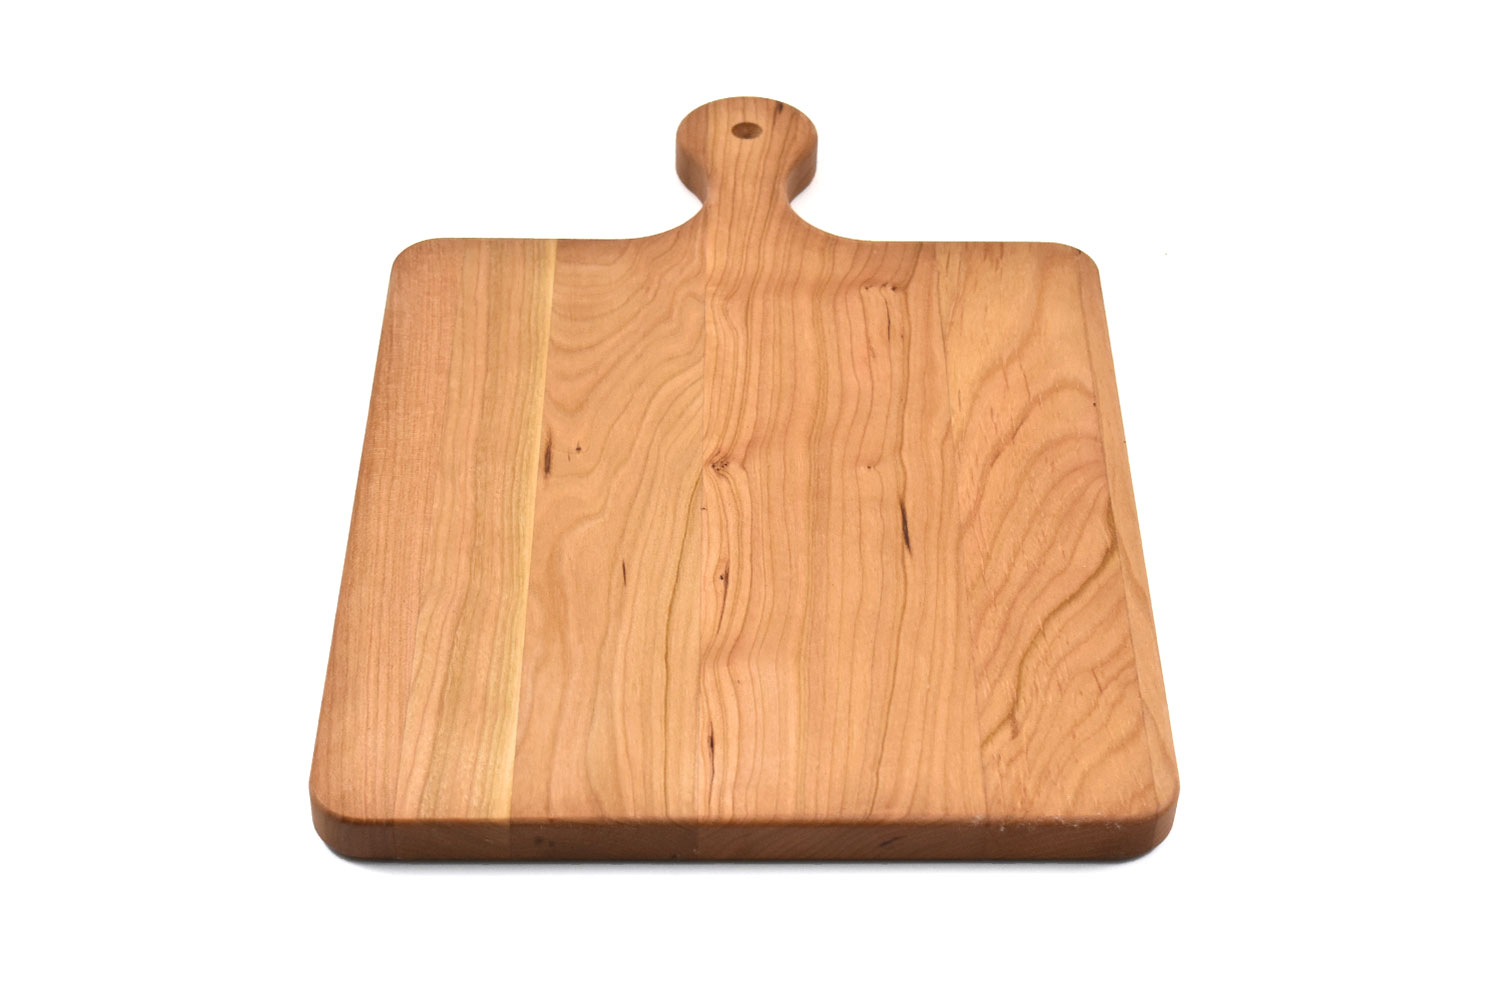 Cherry Wood Cutting Board with Rounded Handle, Custom Engraved, Chopping Board, Presentation Board, Made in Canada